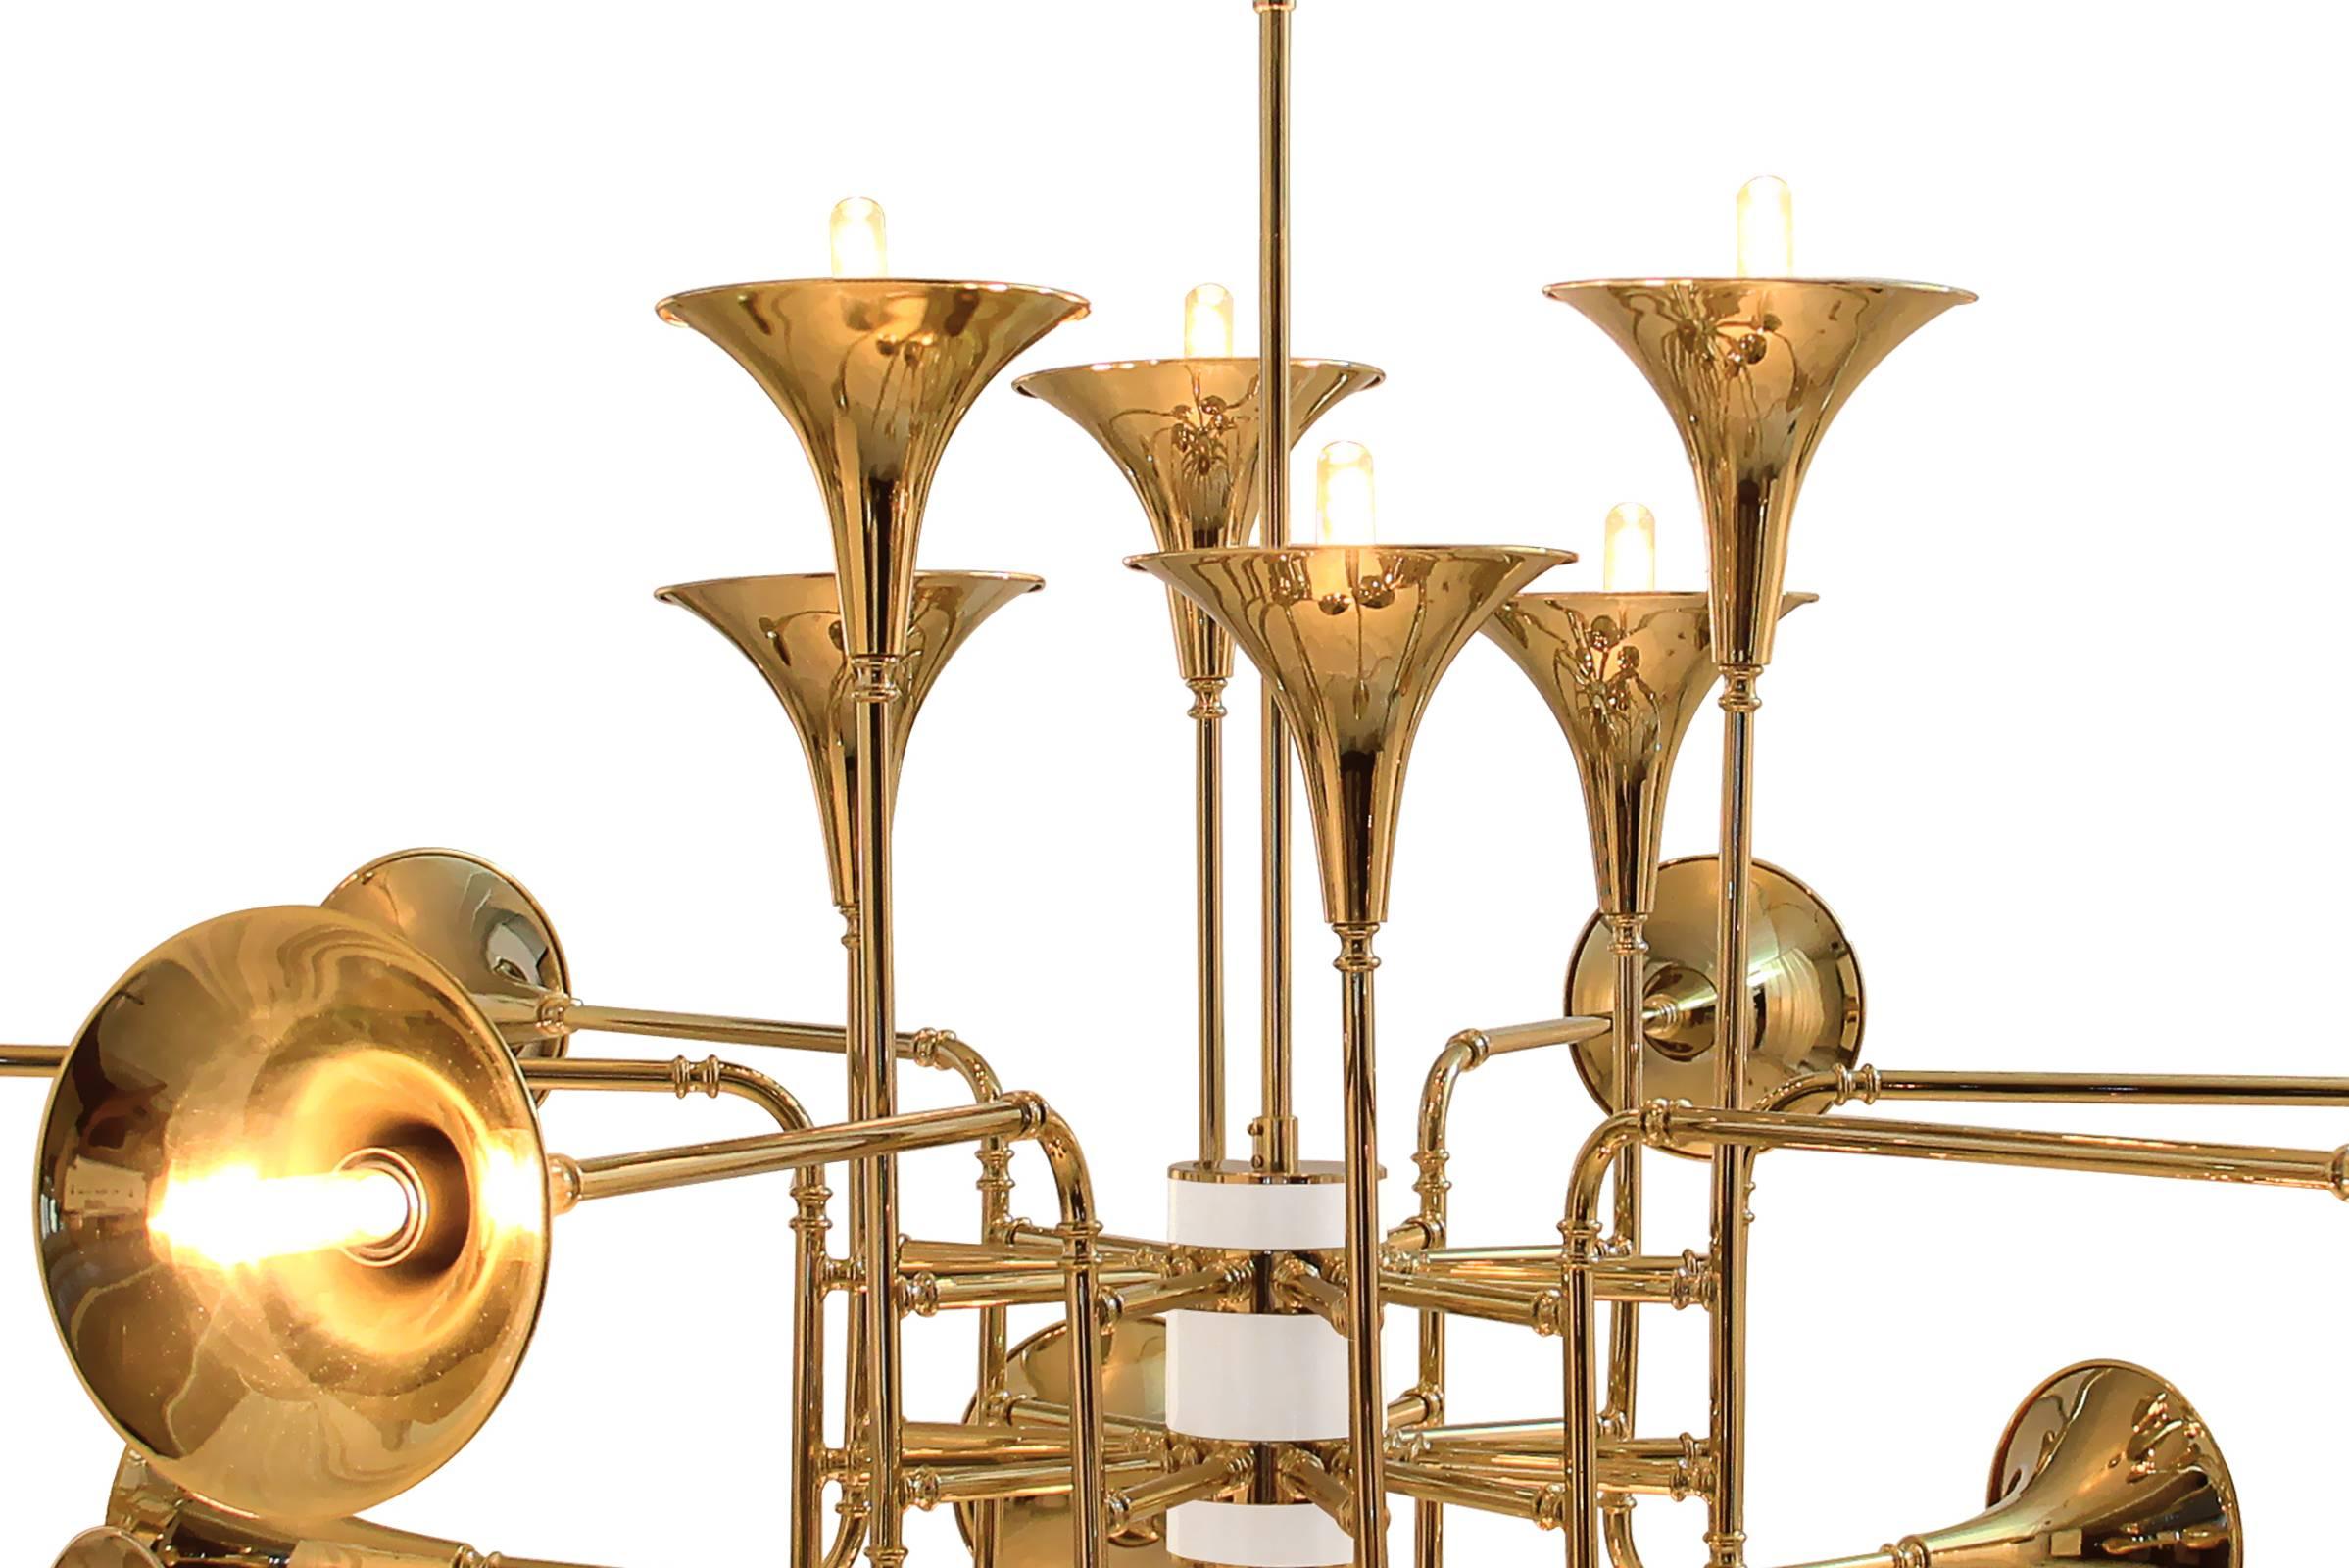 Chandelier Davis with handmade structure in polished solid 
brass and gold-plated. With 24 bulbs. max 40W bulbs. bulbs
not included.

 